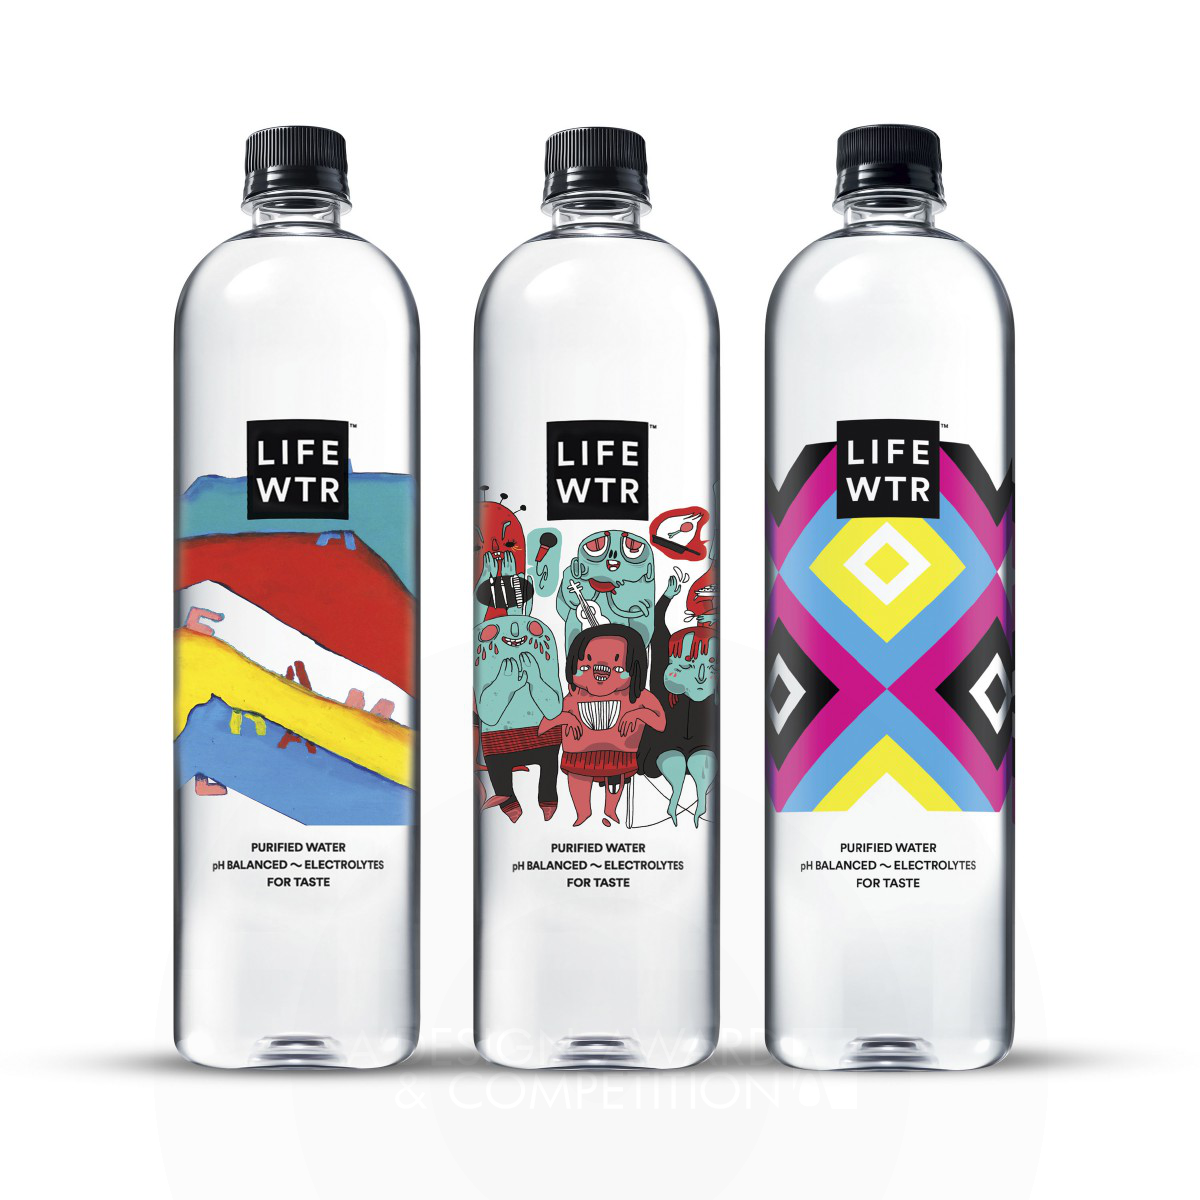 LIFEWTR Series 4: Arts in Education Bottled Water by PepsiCo Design and Innovation